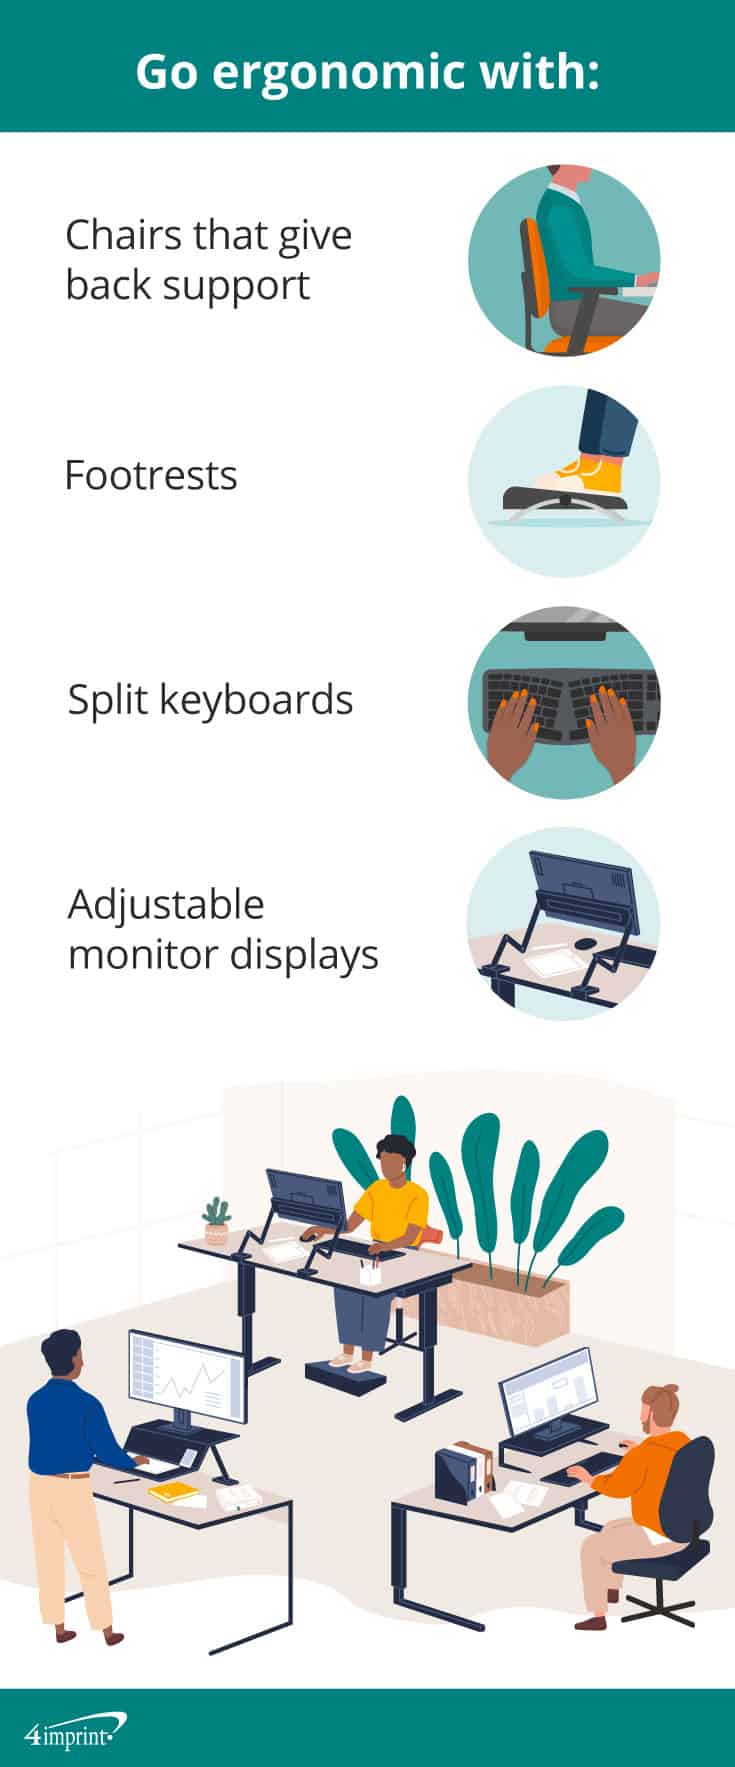 Employees work at various ergonomic desks and workstations. Icons show a supportive chair, footrests, split keyboards and adjustable monitor displays.